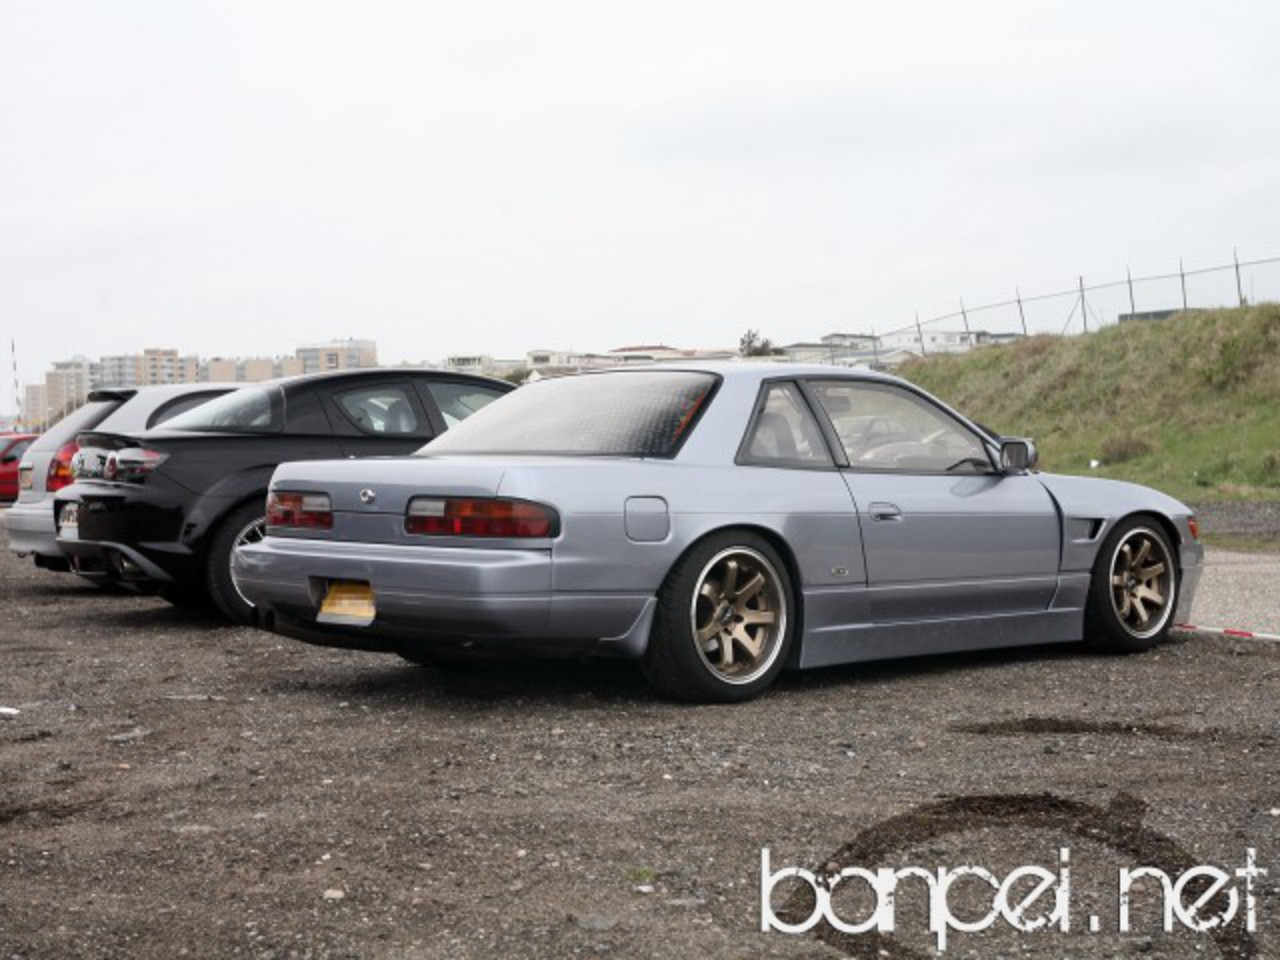 K's S13 with the TRA Kyoto 6666 Customs front (aka Rocket Bunny kit) as